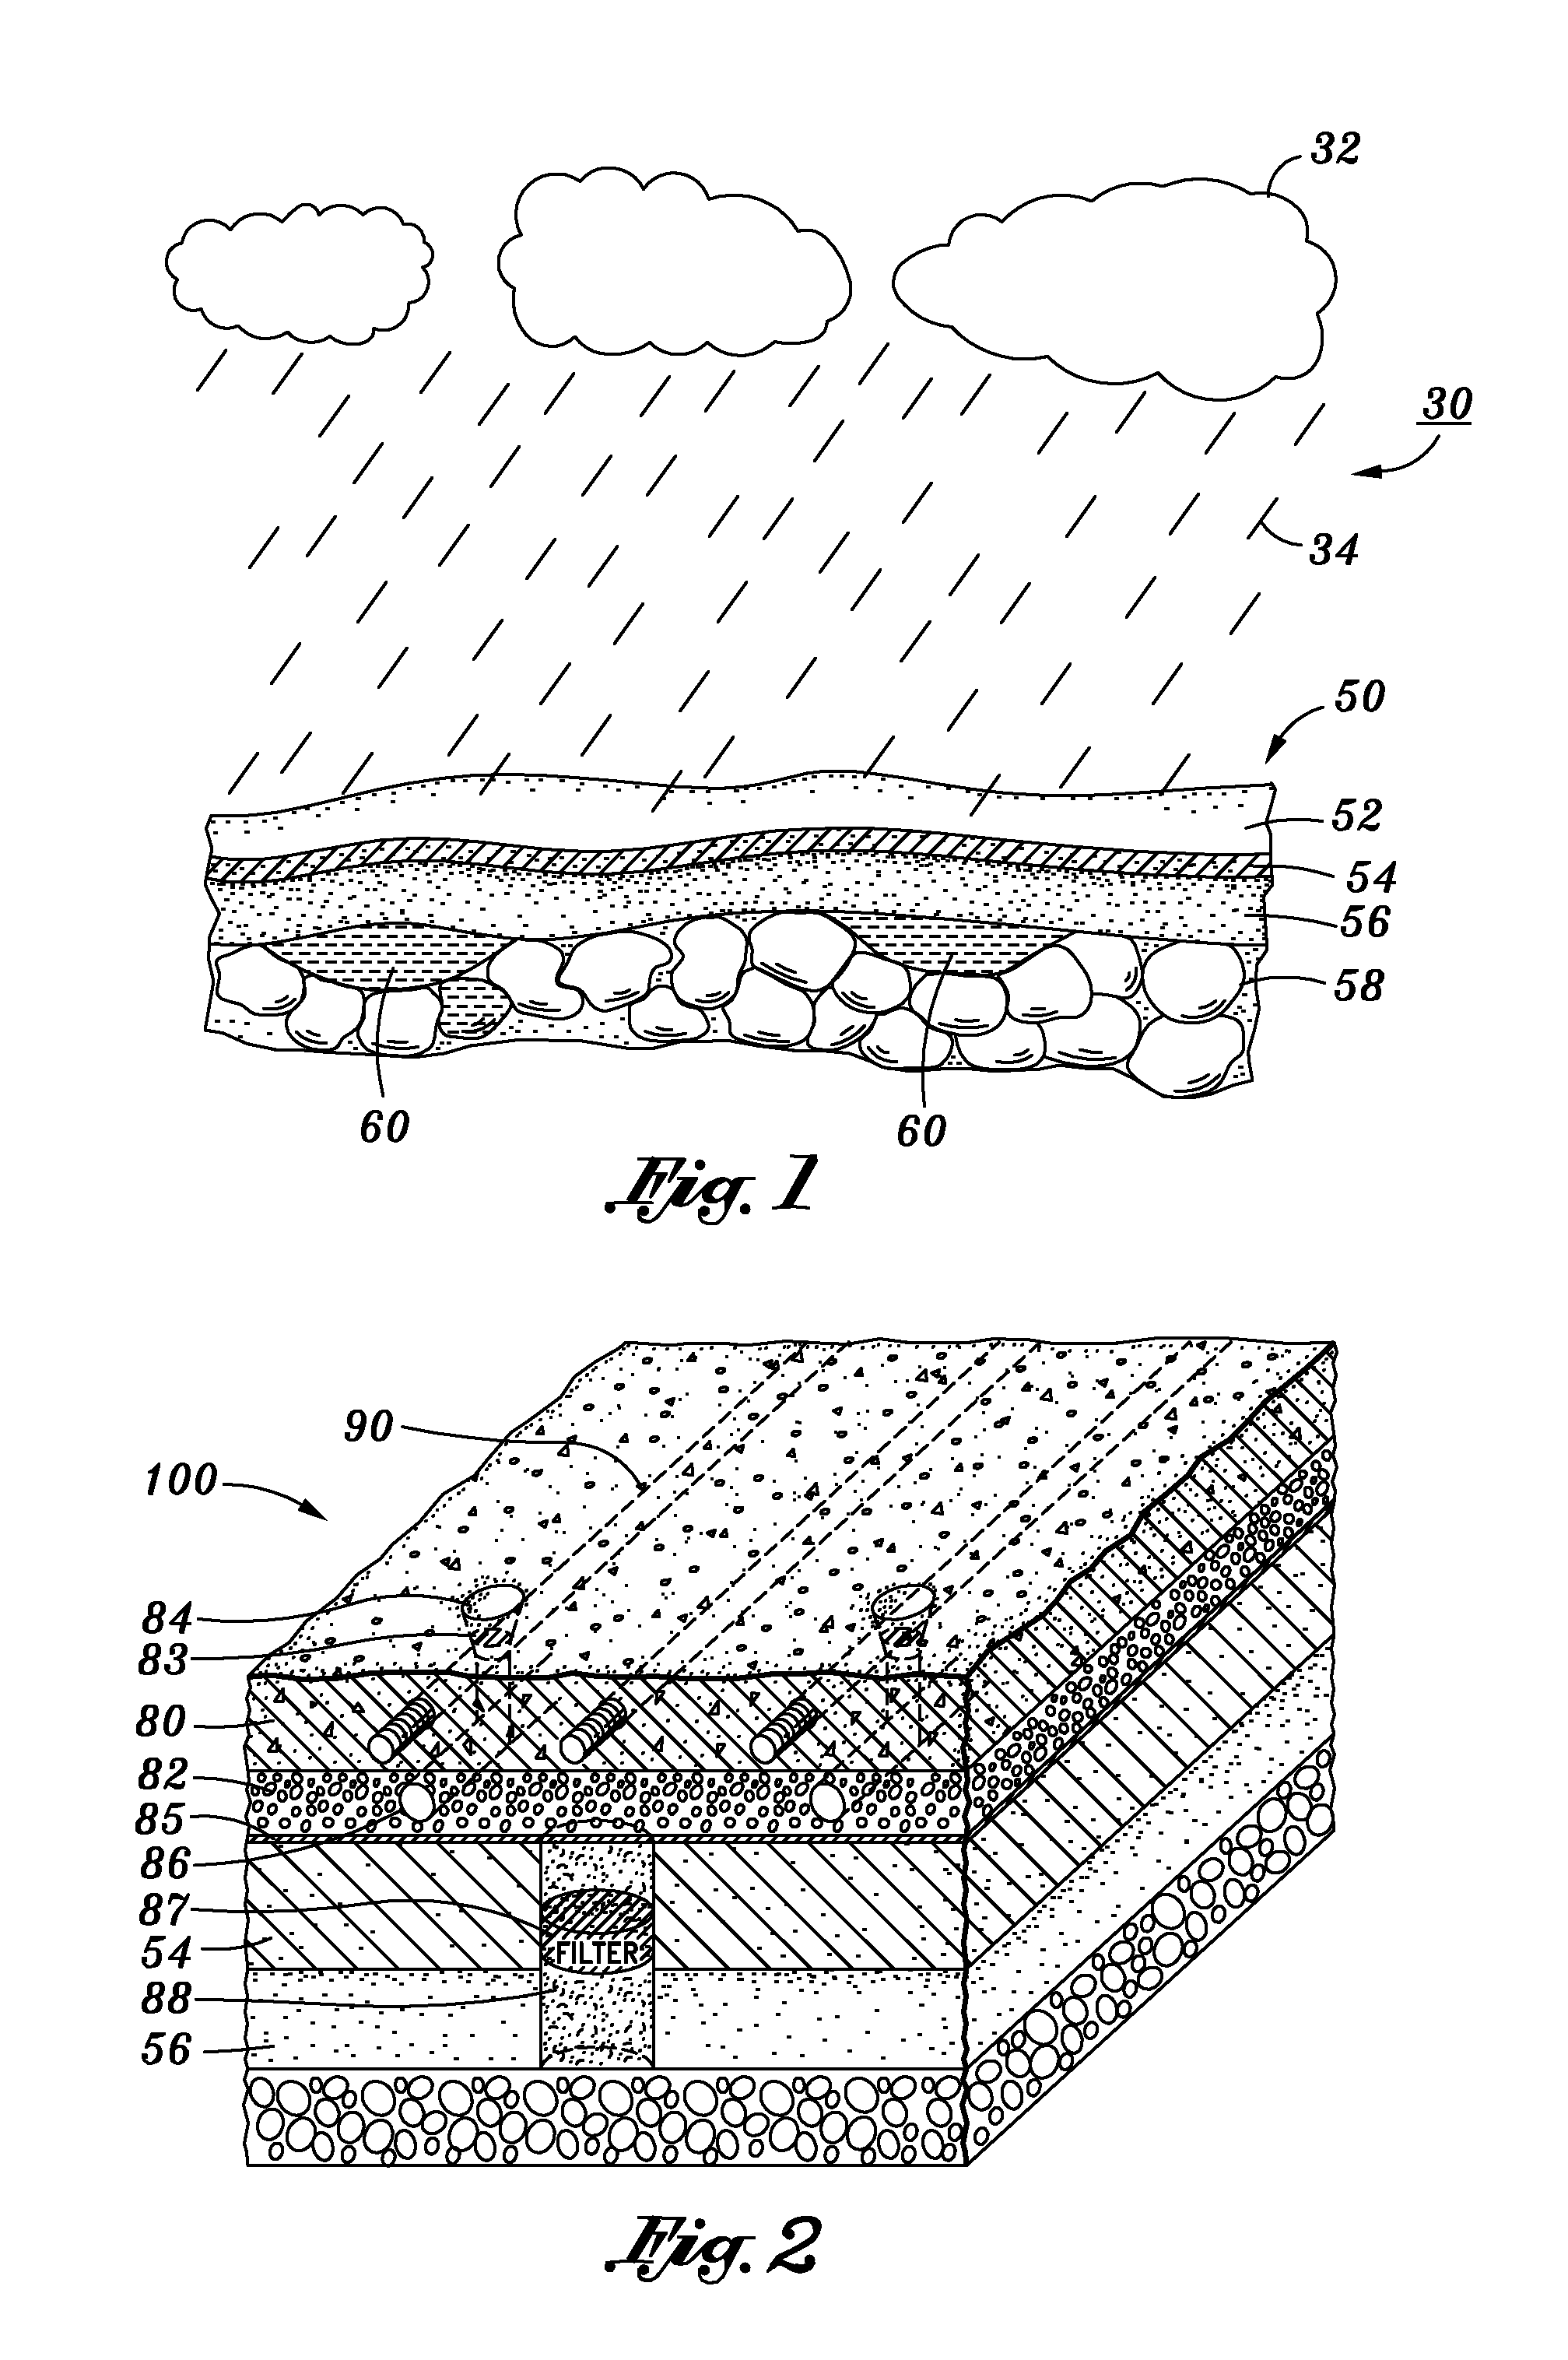 Aquifer replenishment system with filter